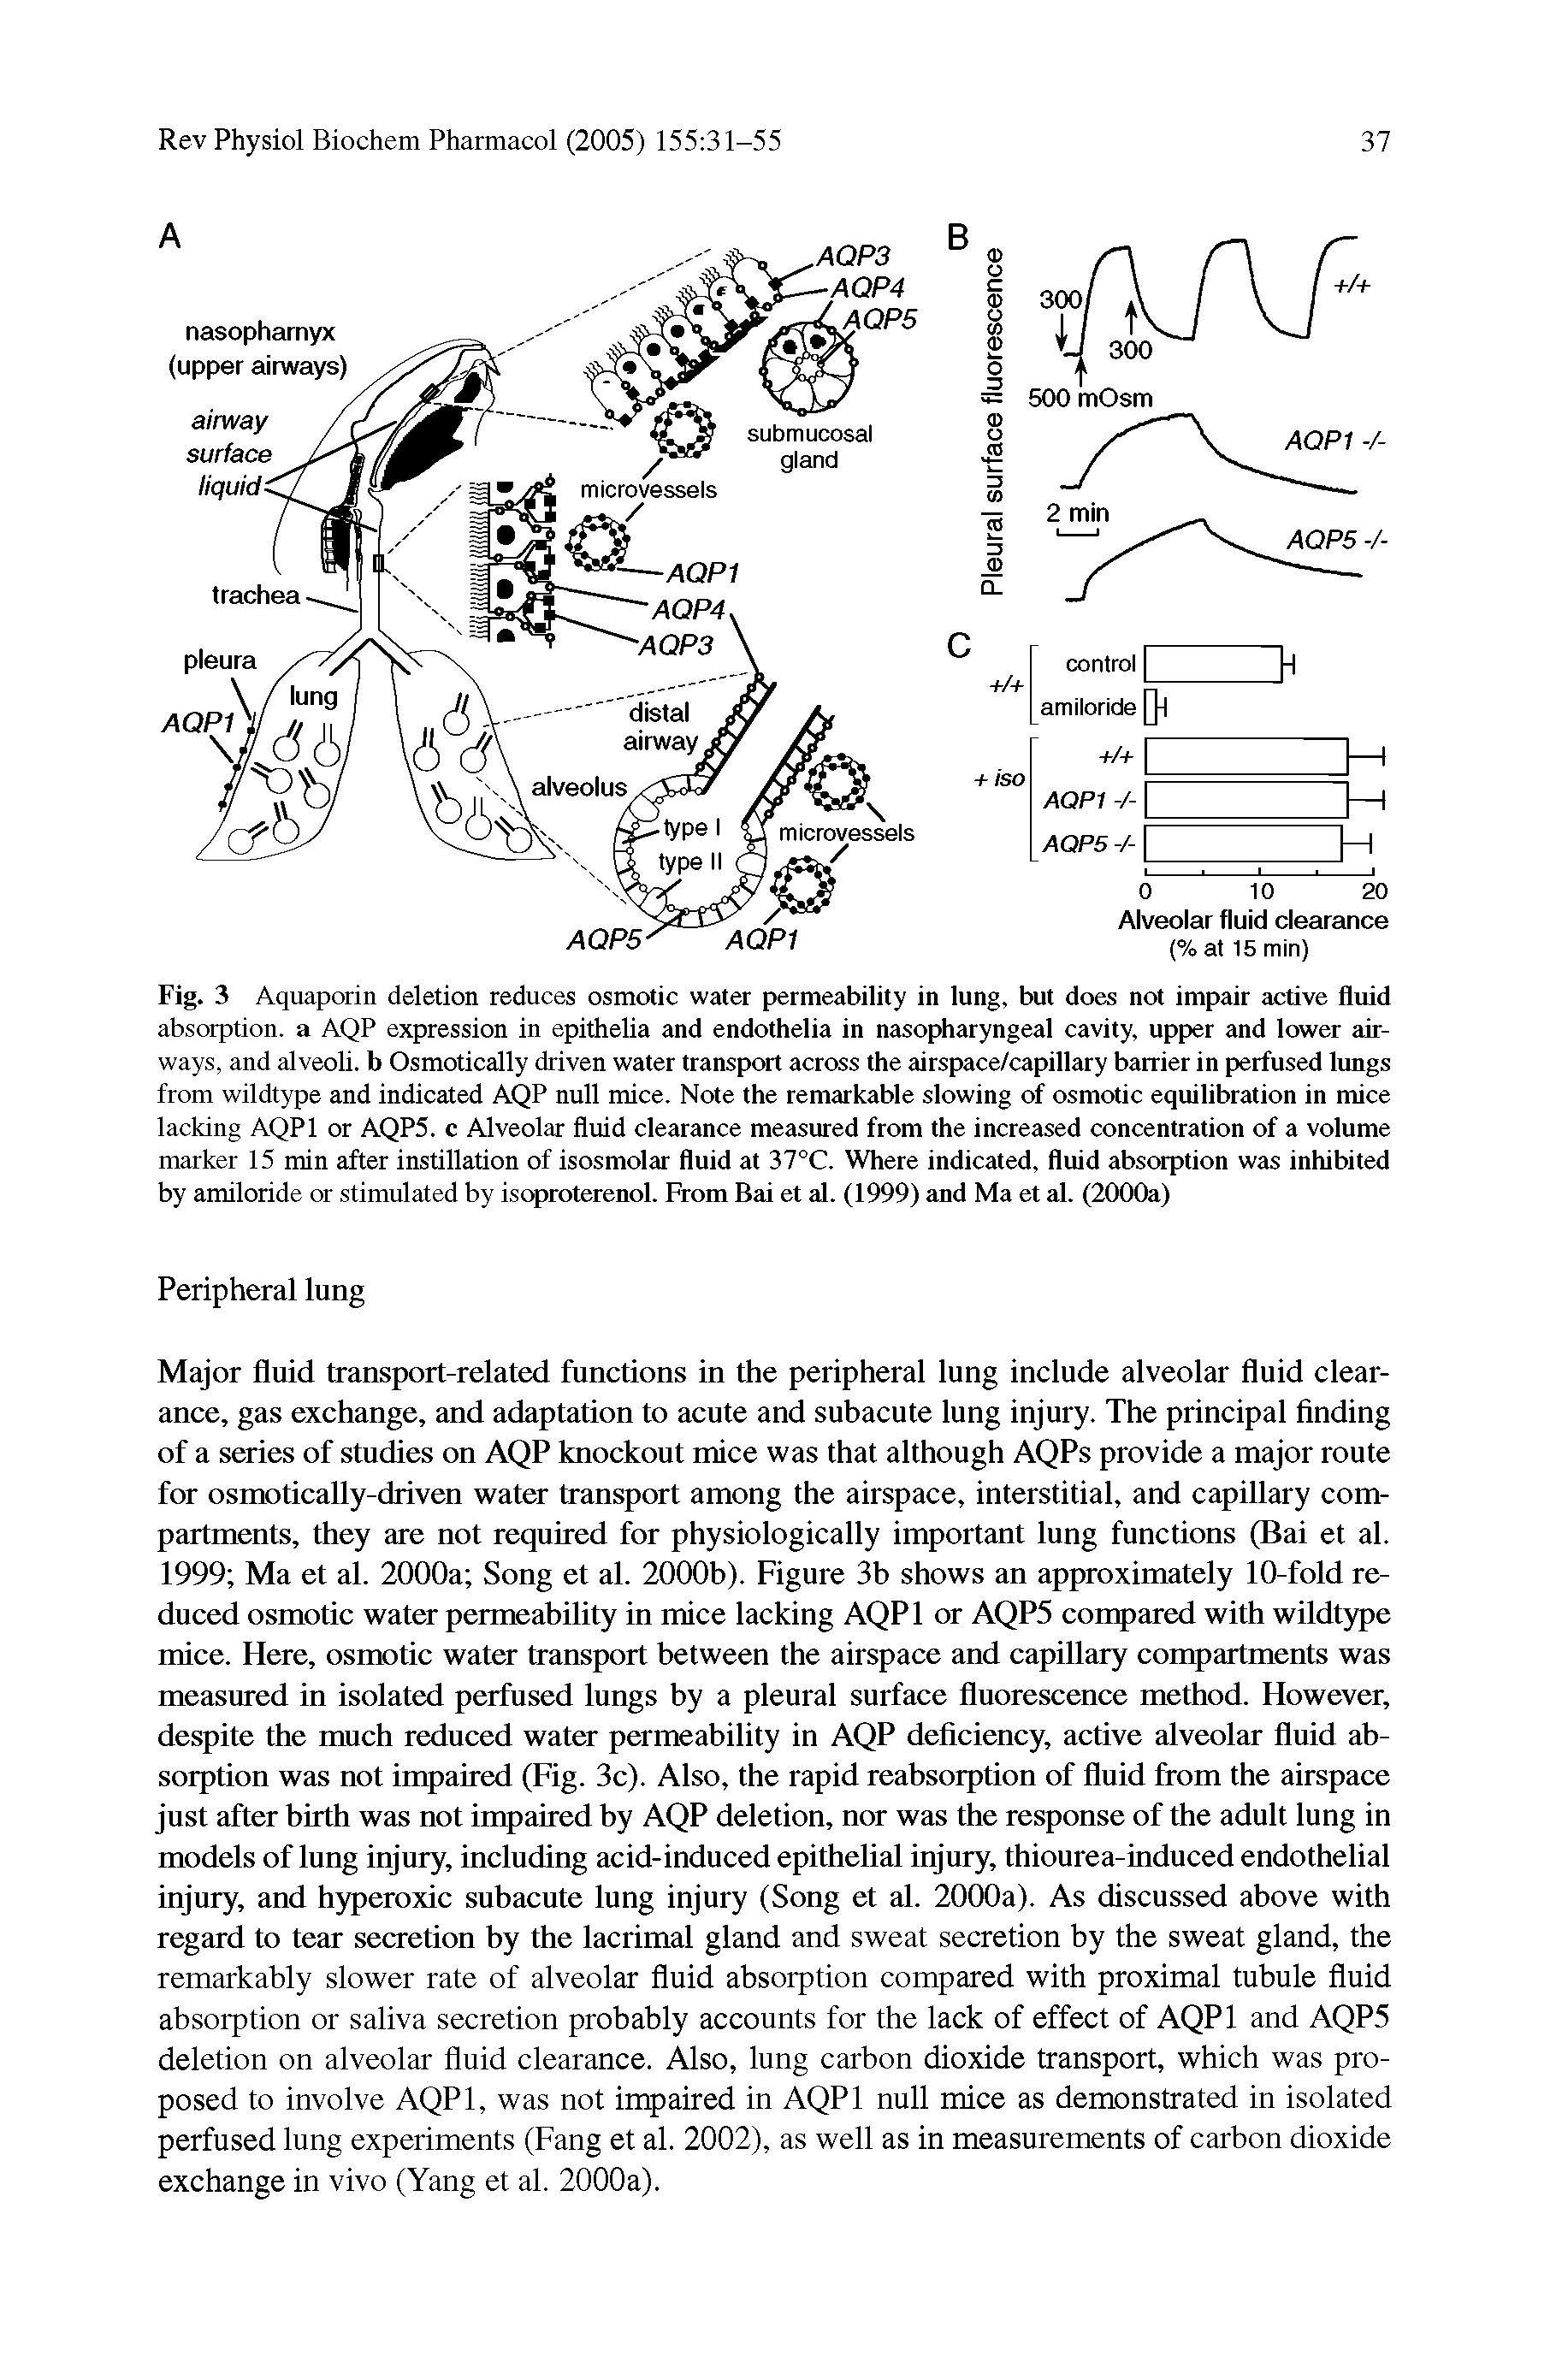 Fig. 3 Aquaporin deletion reduces osmotic water permeability in lung, but does not impair active fluid absorption, a AQP expression in epithelia and endothelia in nasopharyngeal cavity, upper and lower airways, and alveoli, b Osmotically driven water transport across the airspace/capillary barrier in perfused lungs from wildtype and indicated AQP null mice. Note the remarkable slowing of osmotic equilibration in mice lacking AQPl or AQP5. c Alveolar fluid clearance measured from the increased concentration of a volume marker 15 min after instillation of isosmolar fluid at 37°C. Where indicated, fluid absorption was inhibited by amiloride or stimulated by isoproterenol. From Bat et al. (1999) and Ma et al. (2000a)...